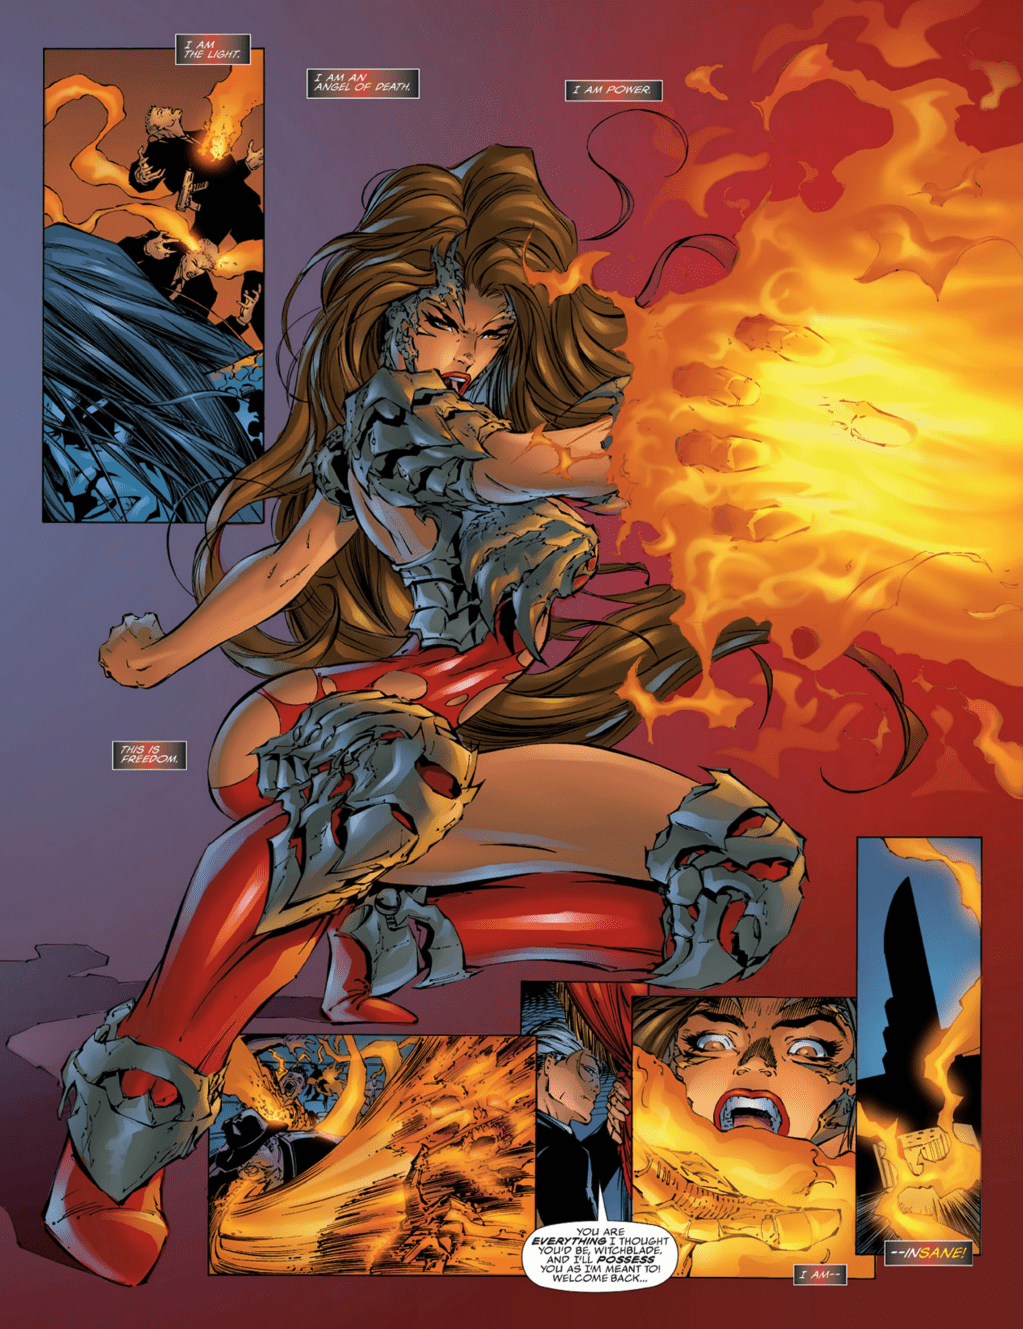 Sara Pezzini becomes the latest wielder of the Witchblade in Witchblade Vol. 1 #1 (1995), Image Comics. Words by Michael Turner, David Wohl, and Christina Z, art by Jonathan D. Smith, D-Tron, MIchael Turner, Viet Truong, Nathan Cabrera, and Dennis Heisler.